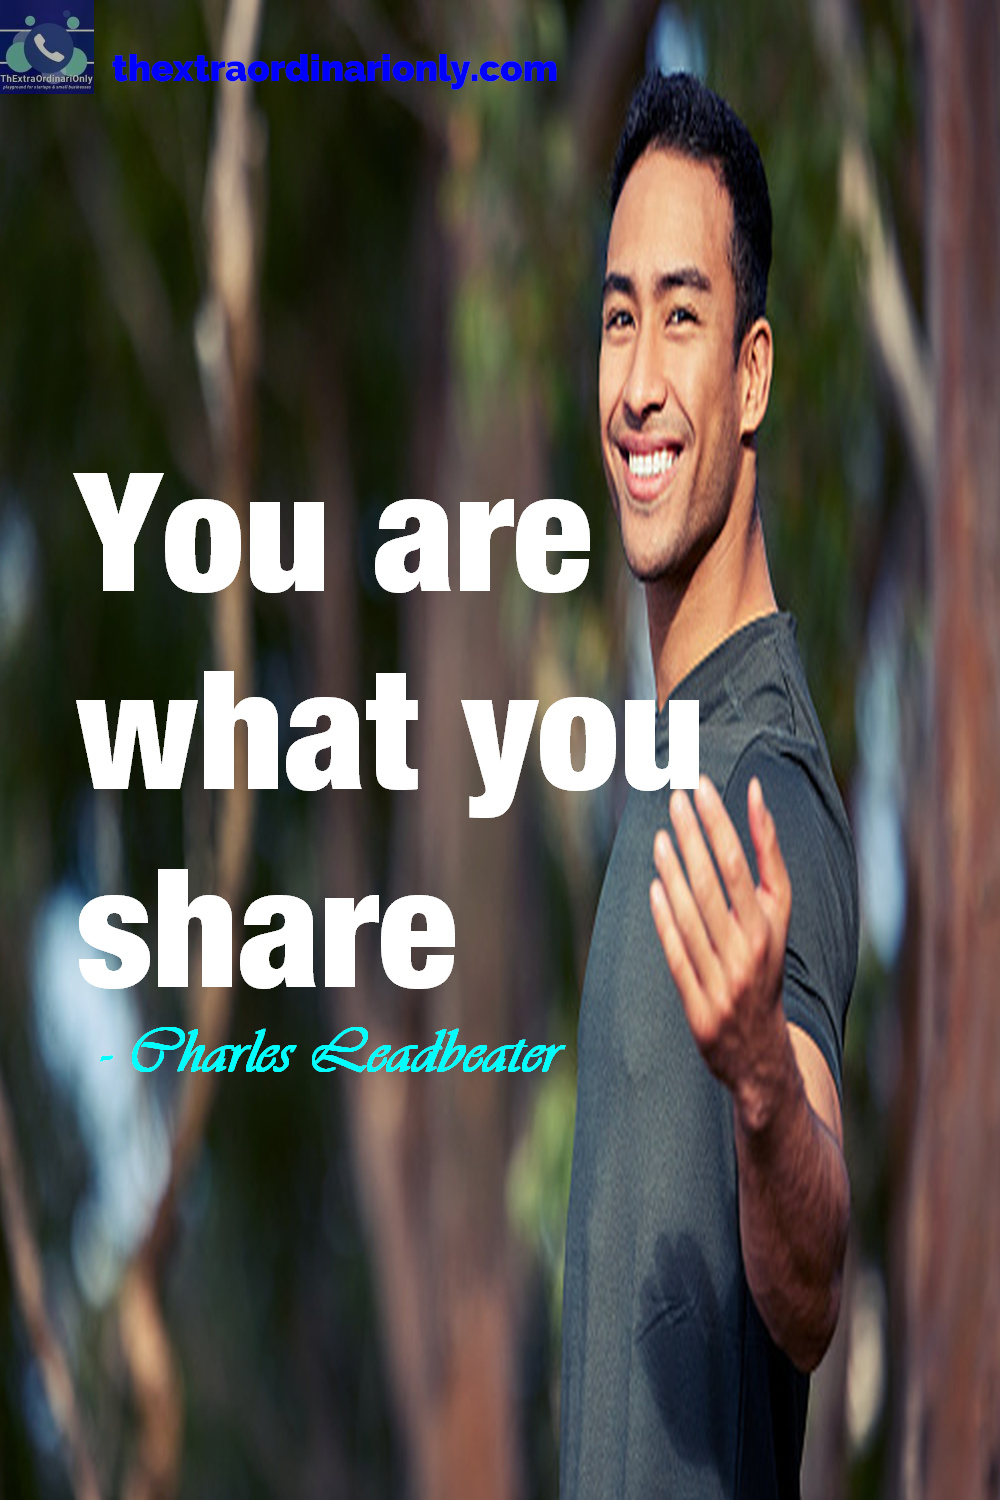 You are what you share - Charles Leadbeater